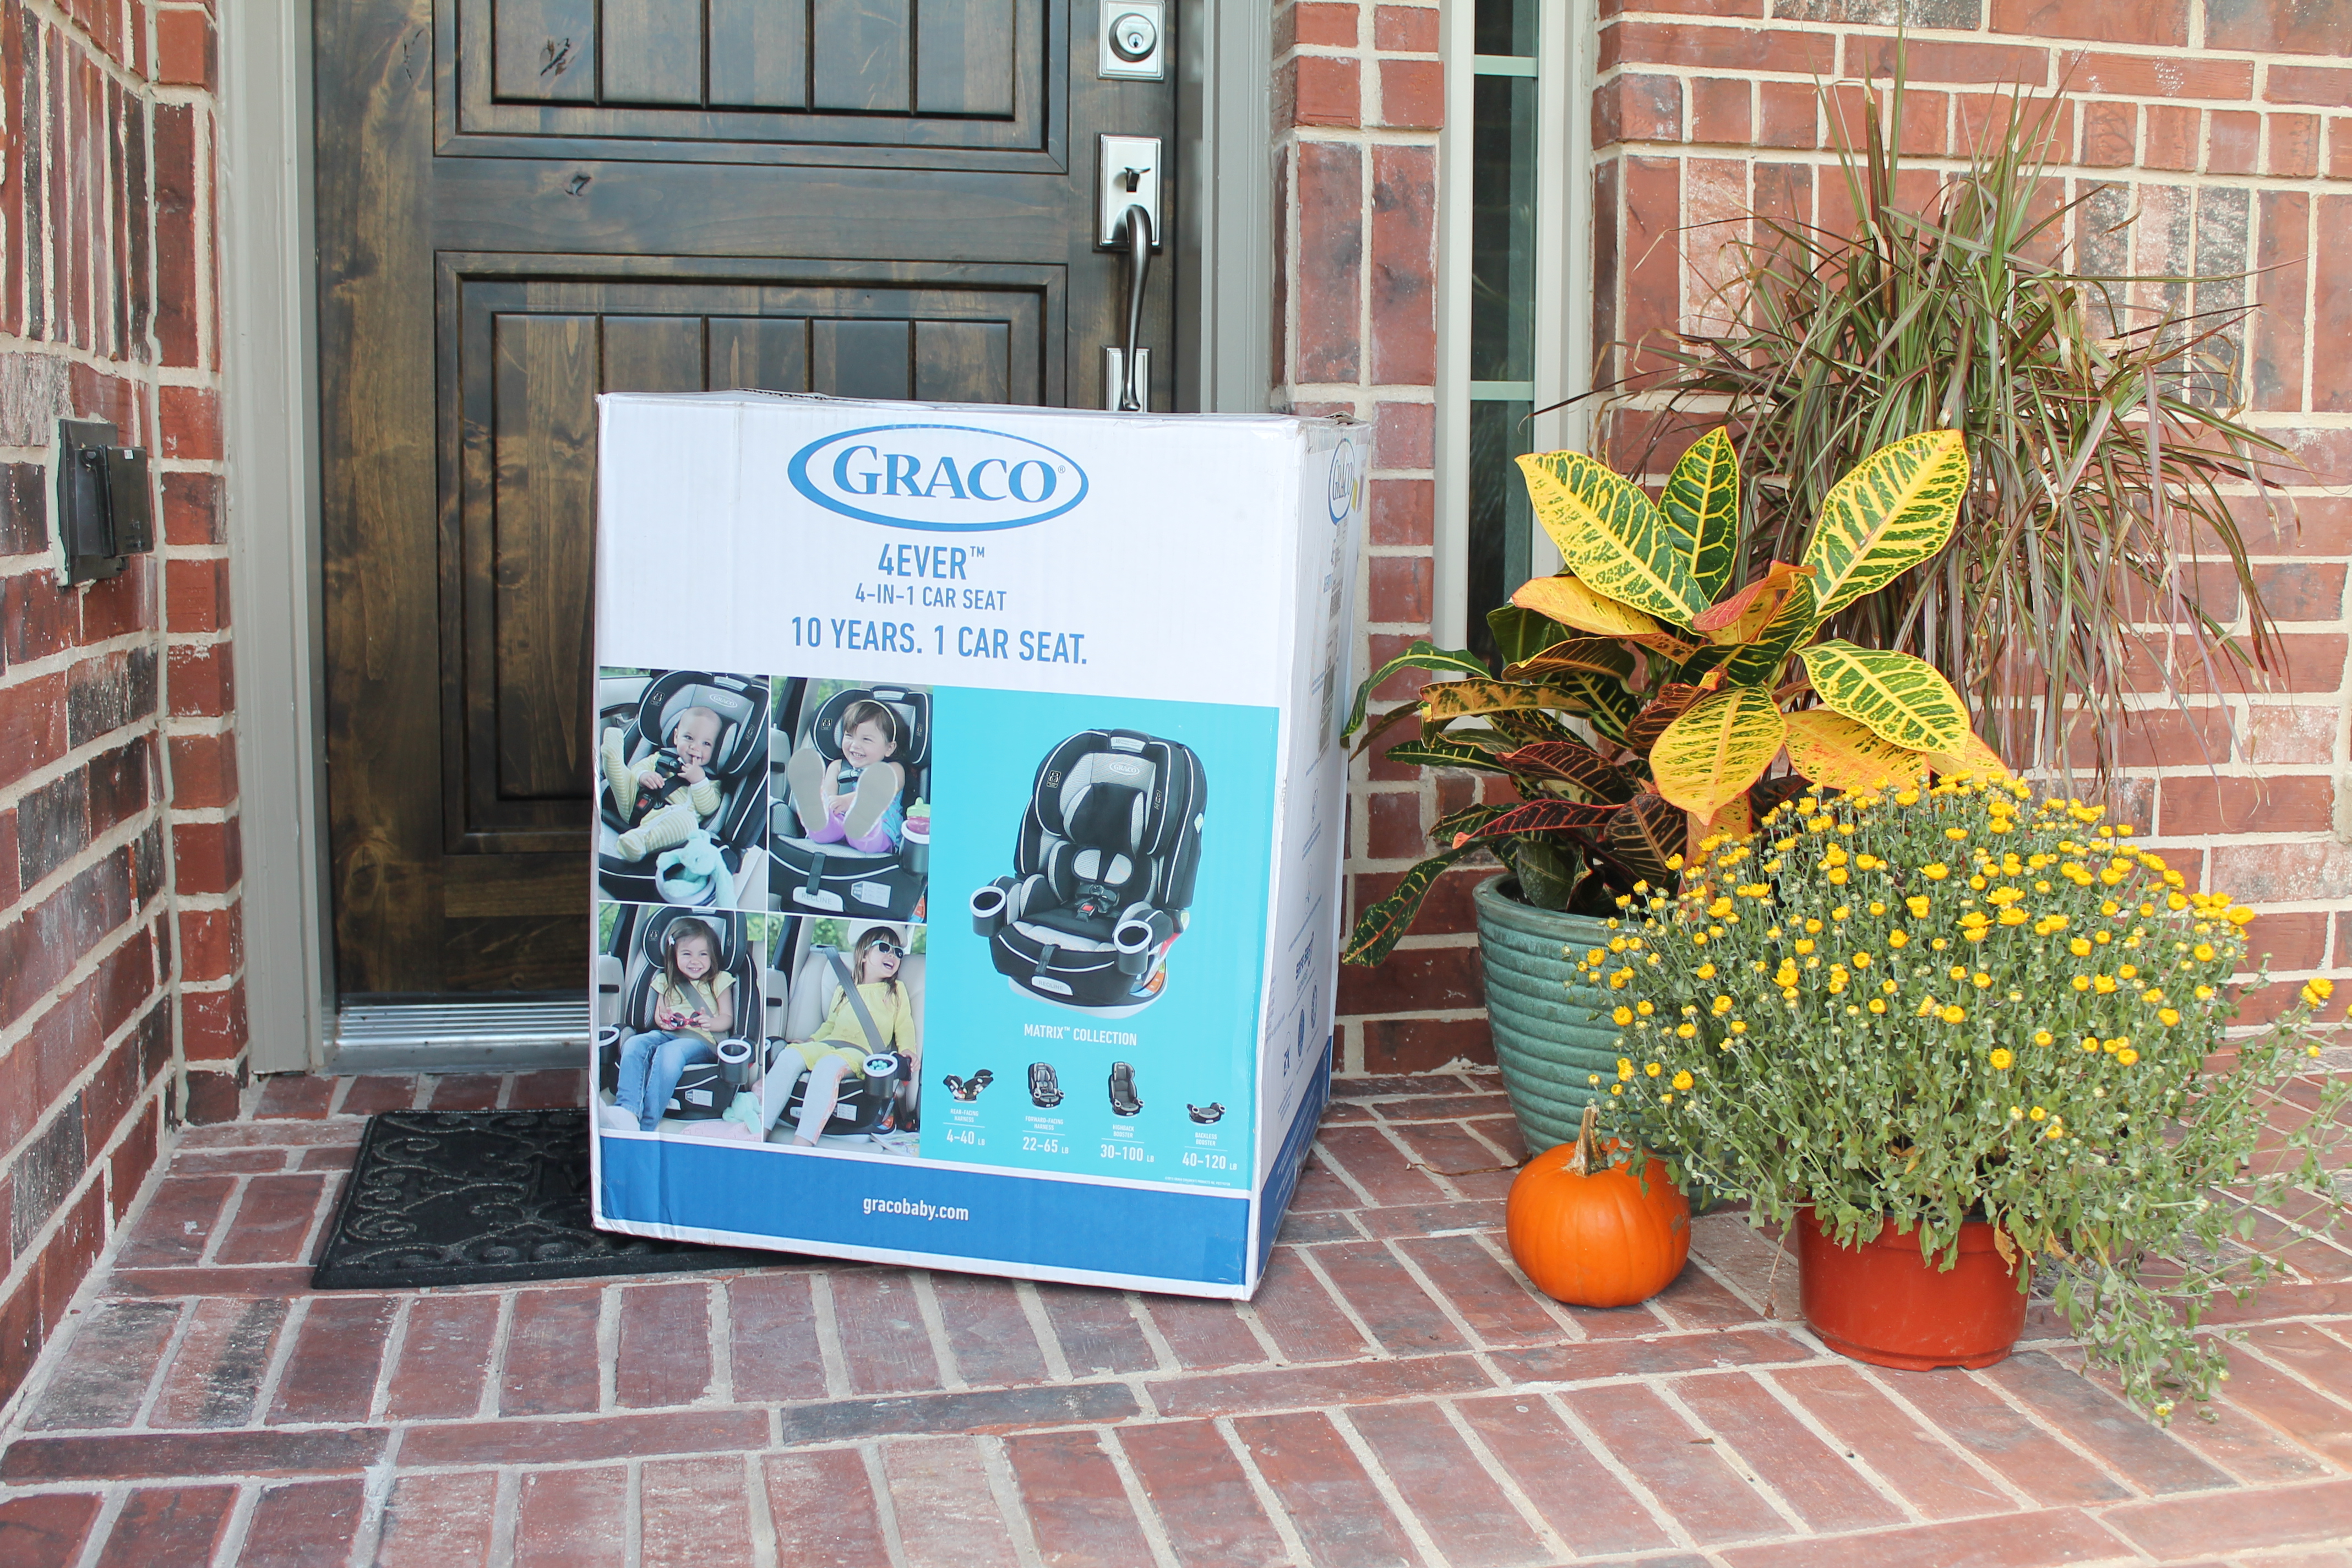 What to look for when choosing a new car seat & three big reasons why we went with the Graco 4Ever All-in-1: quality, safety, & affordability.